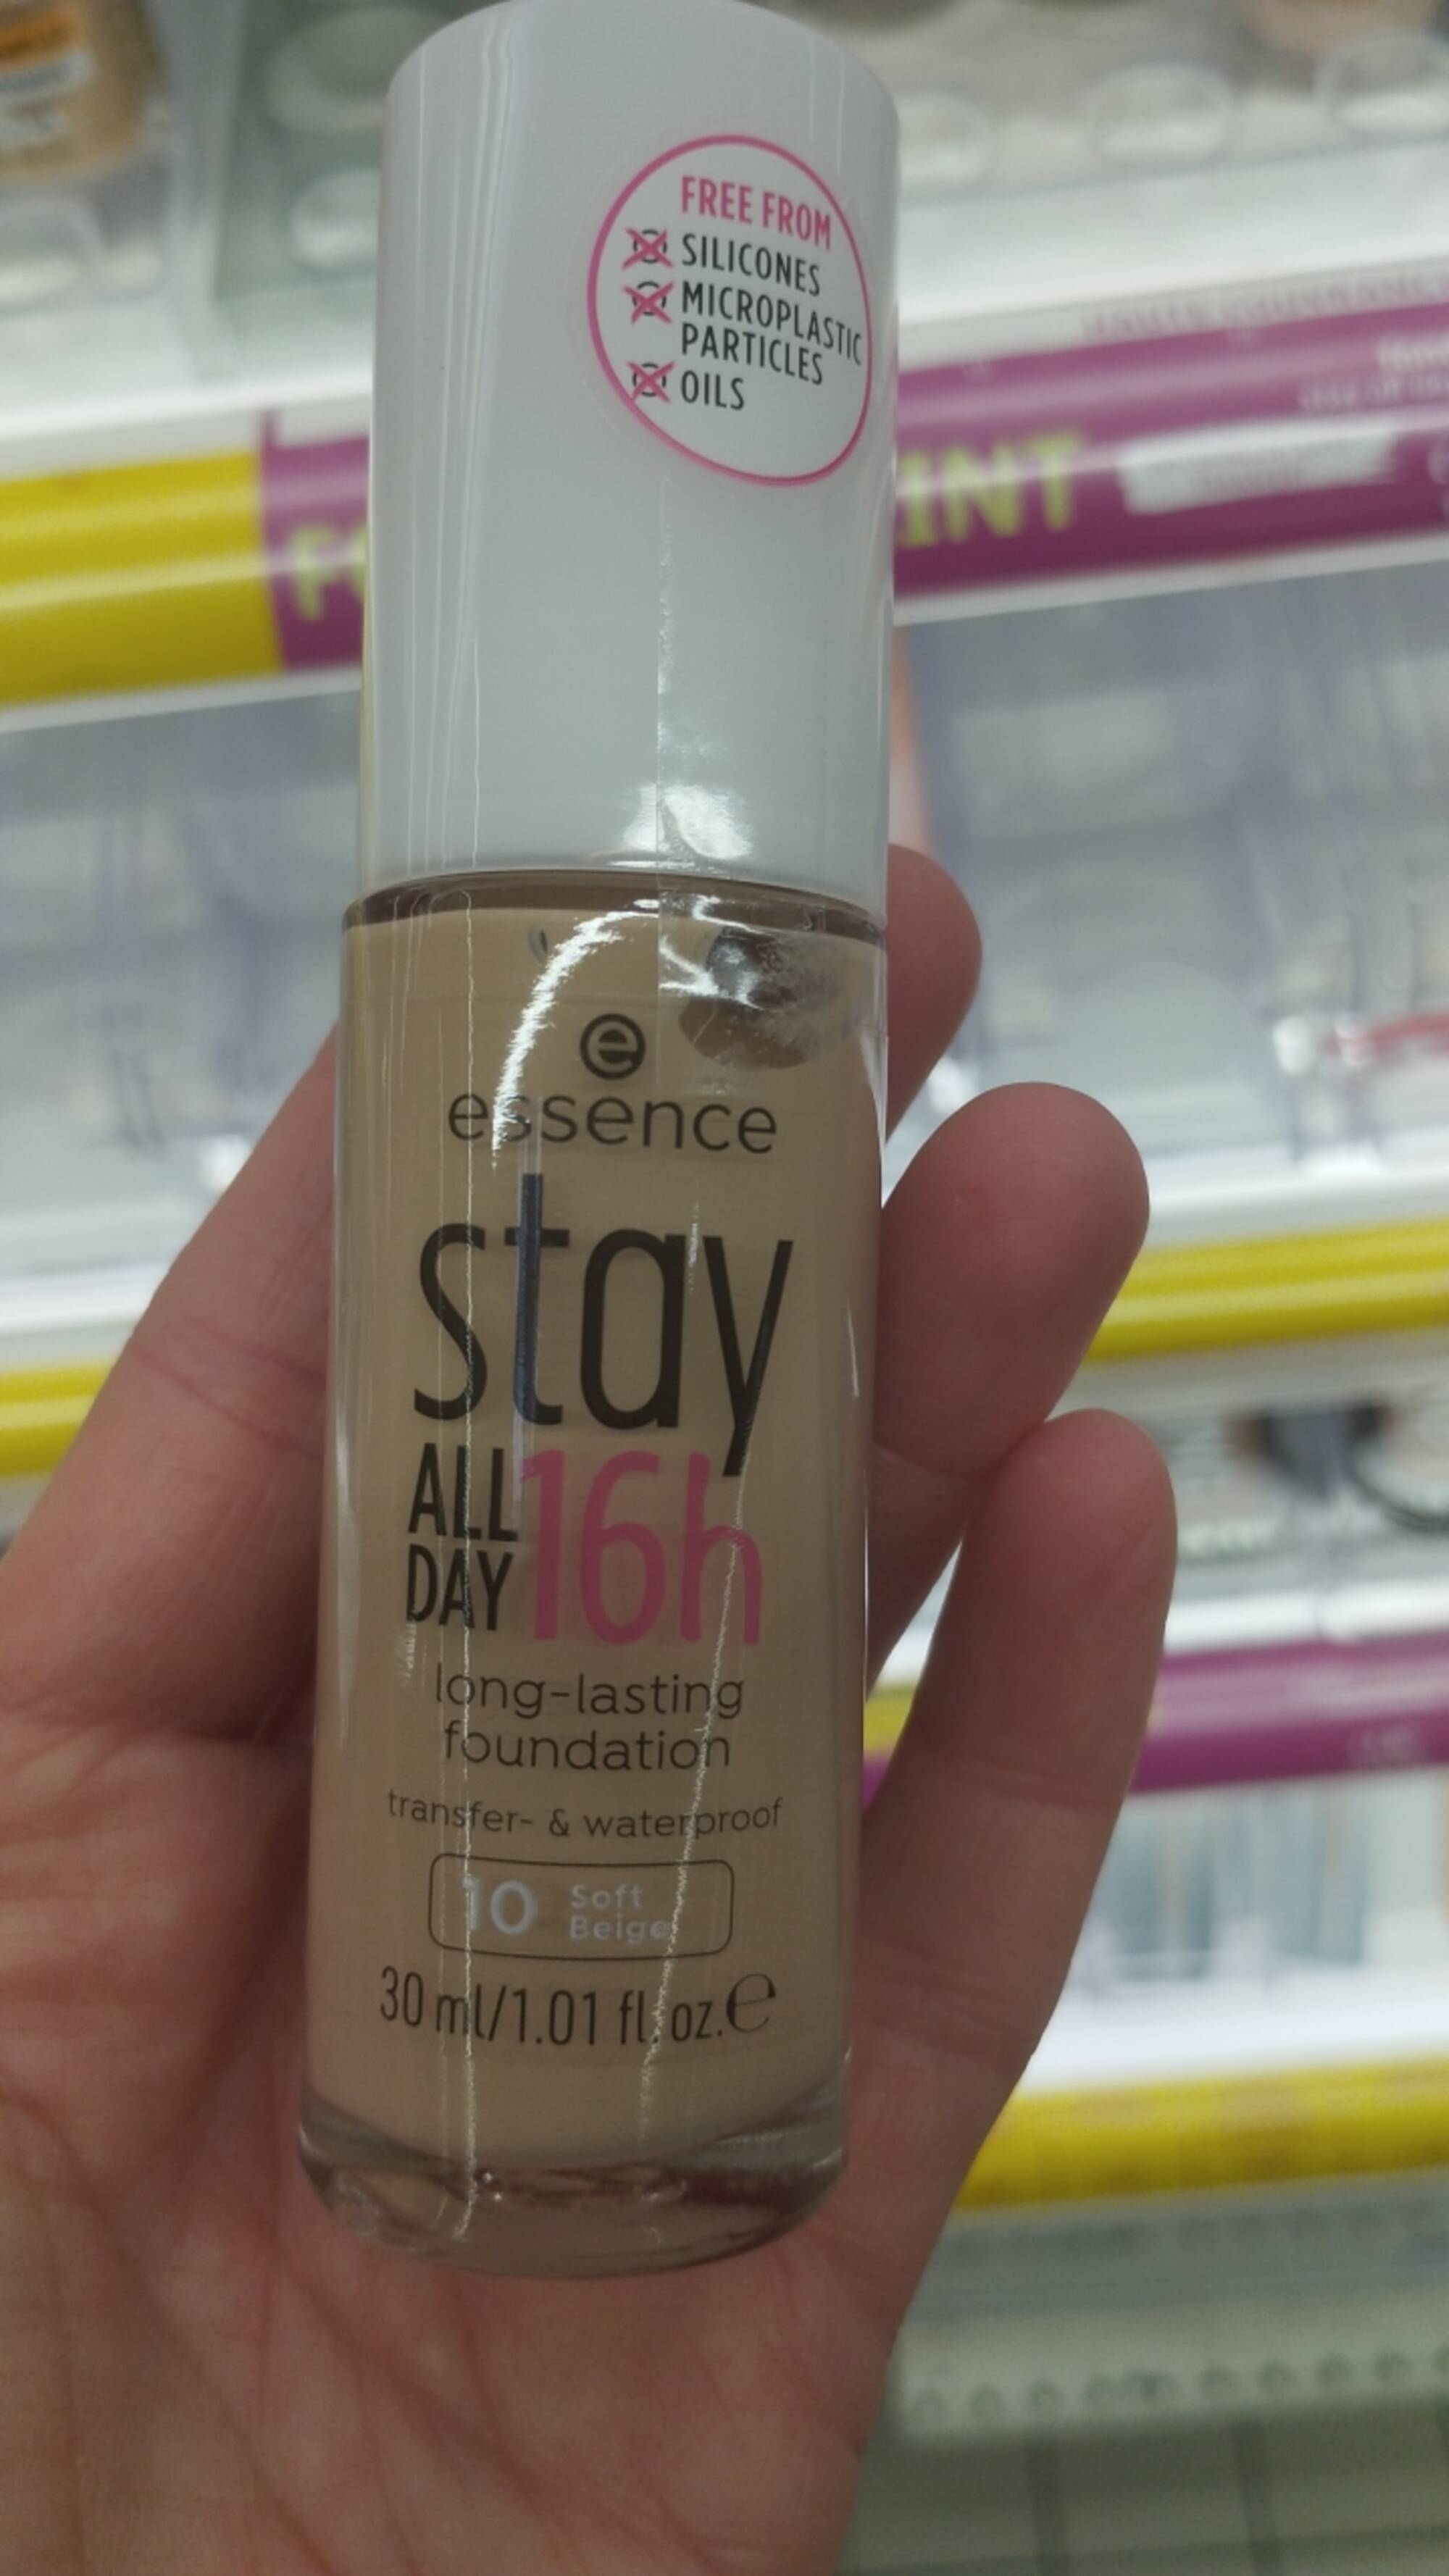 ESSENCE - Stay all day 16h - Long-lasting foundation 10 soft beige